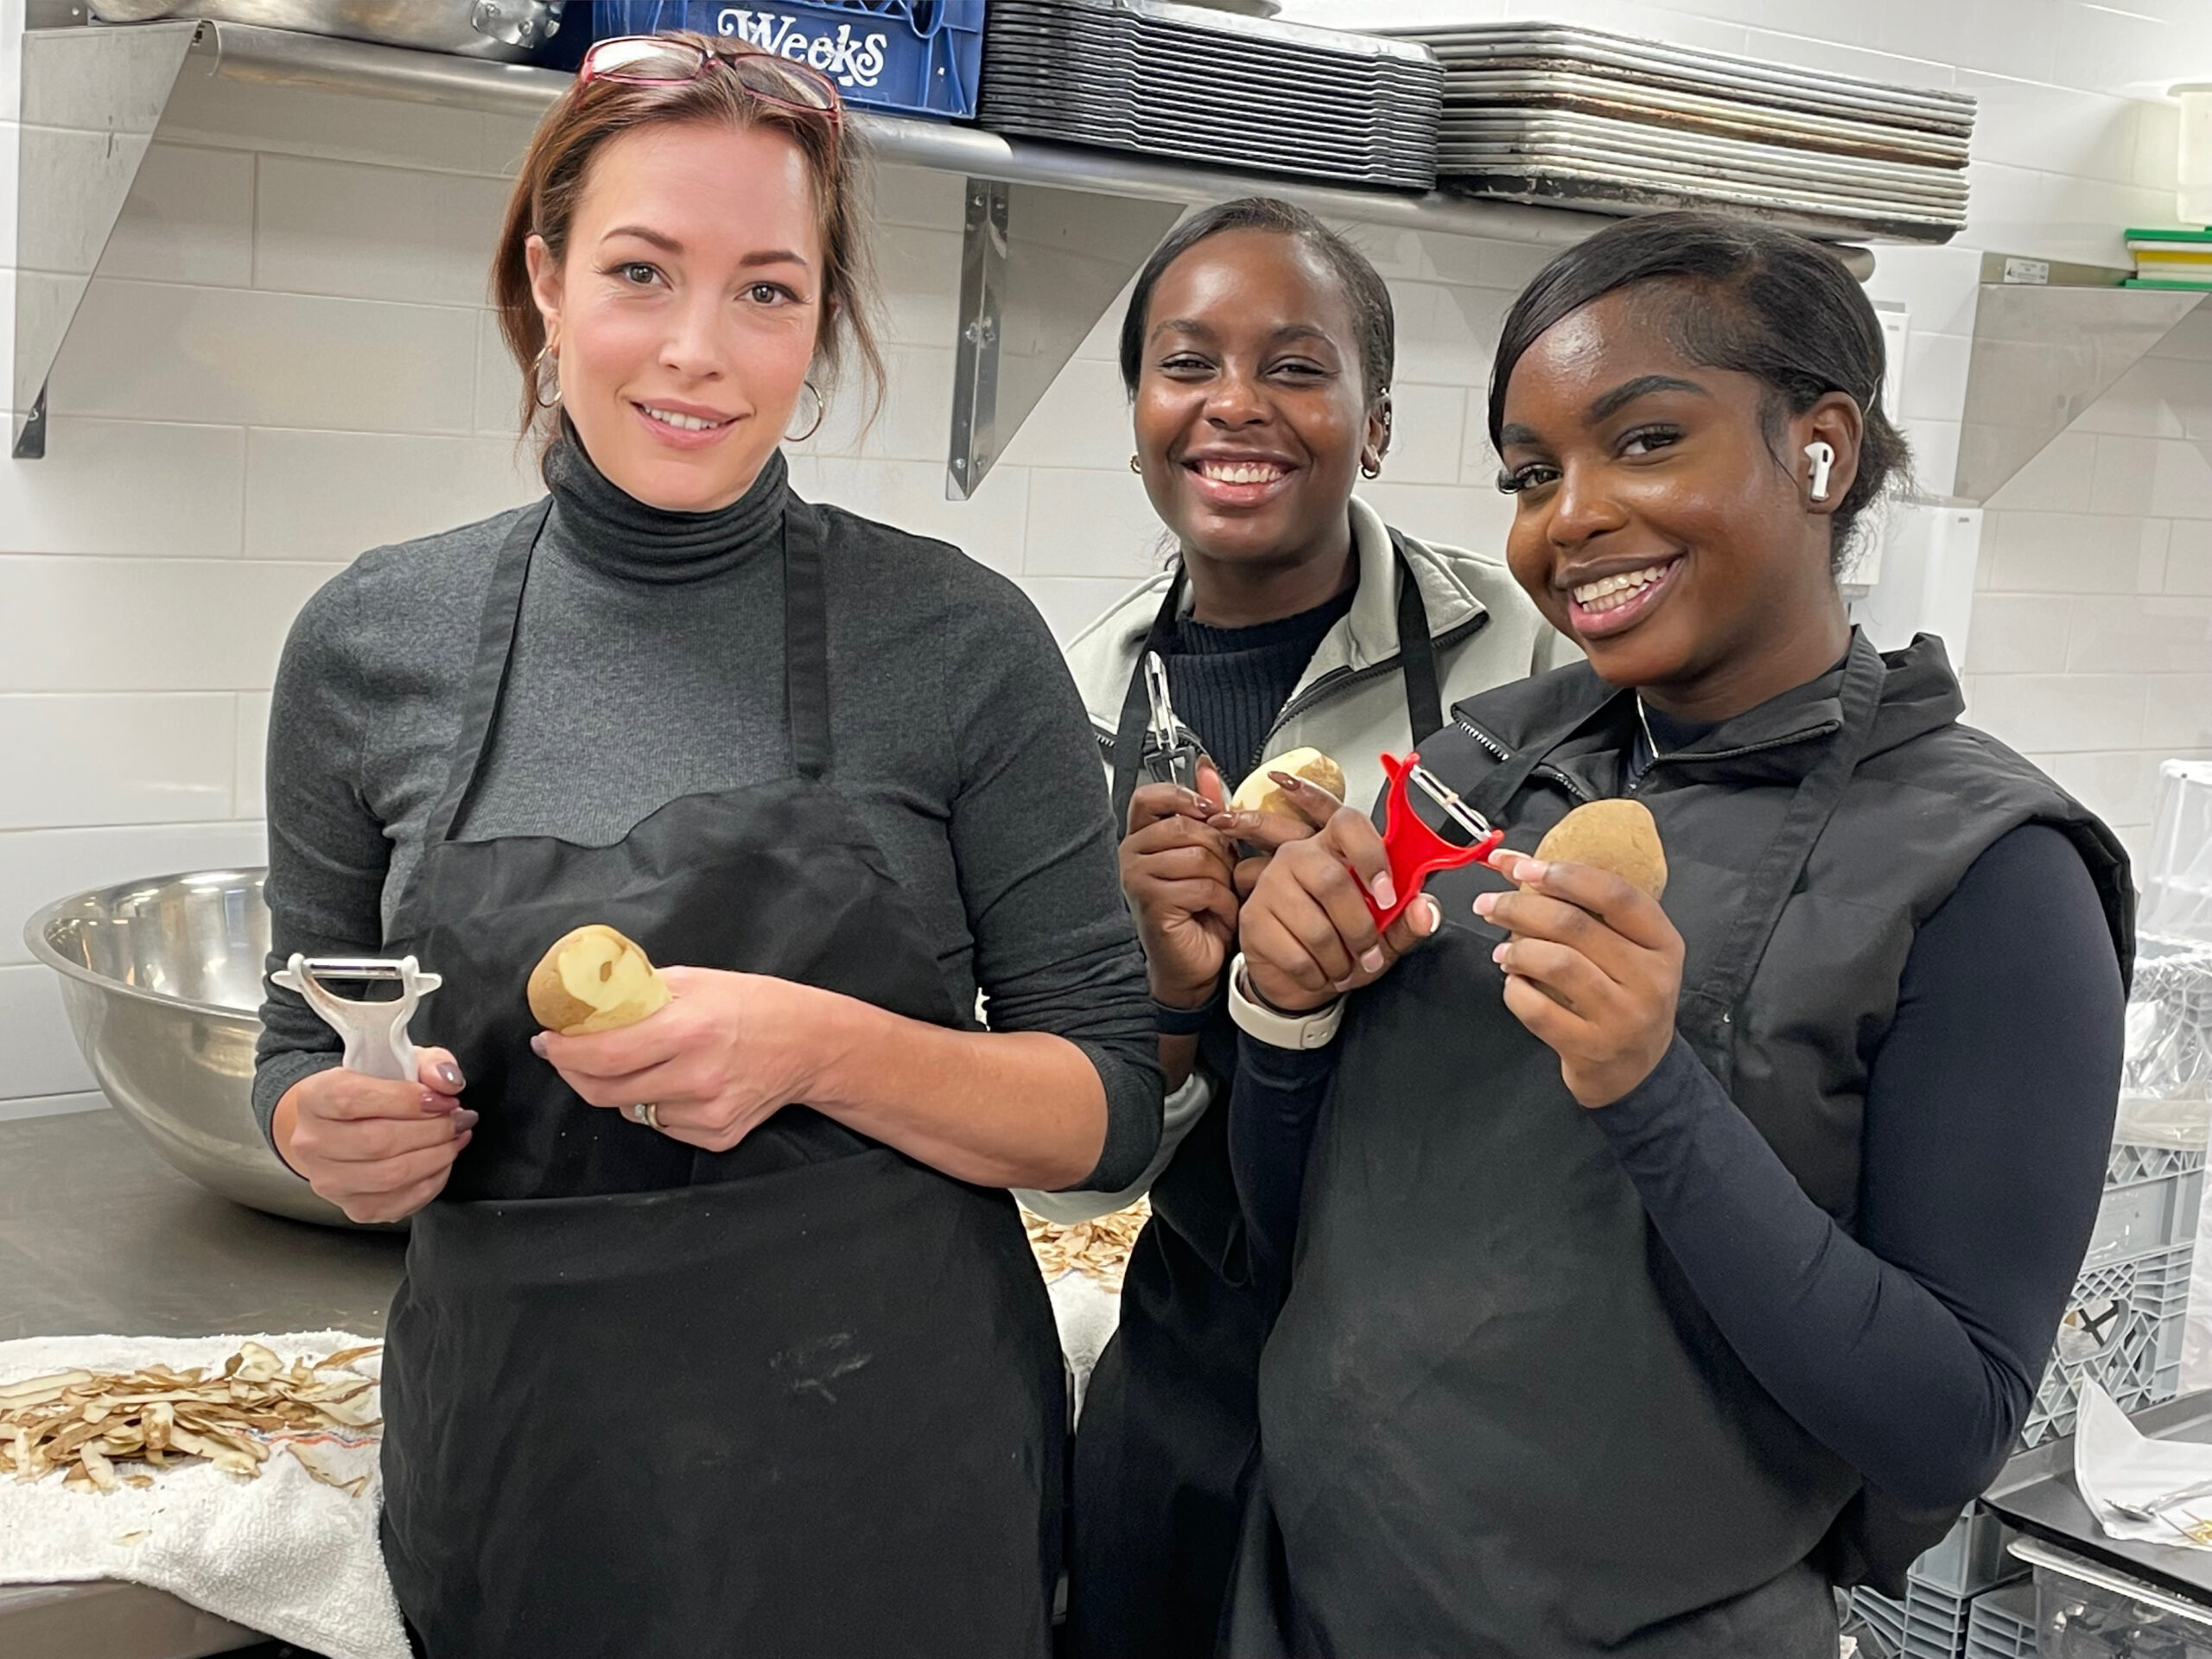 East End Women's Network President Katherine Pierro and members Madlie and Skerly Armand prepare food for a Thanksgiving charity event. COURTESY KATHERINE PIERRO